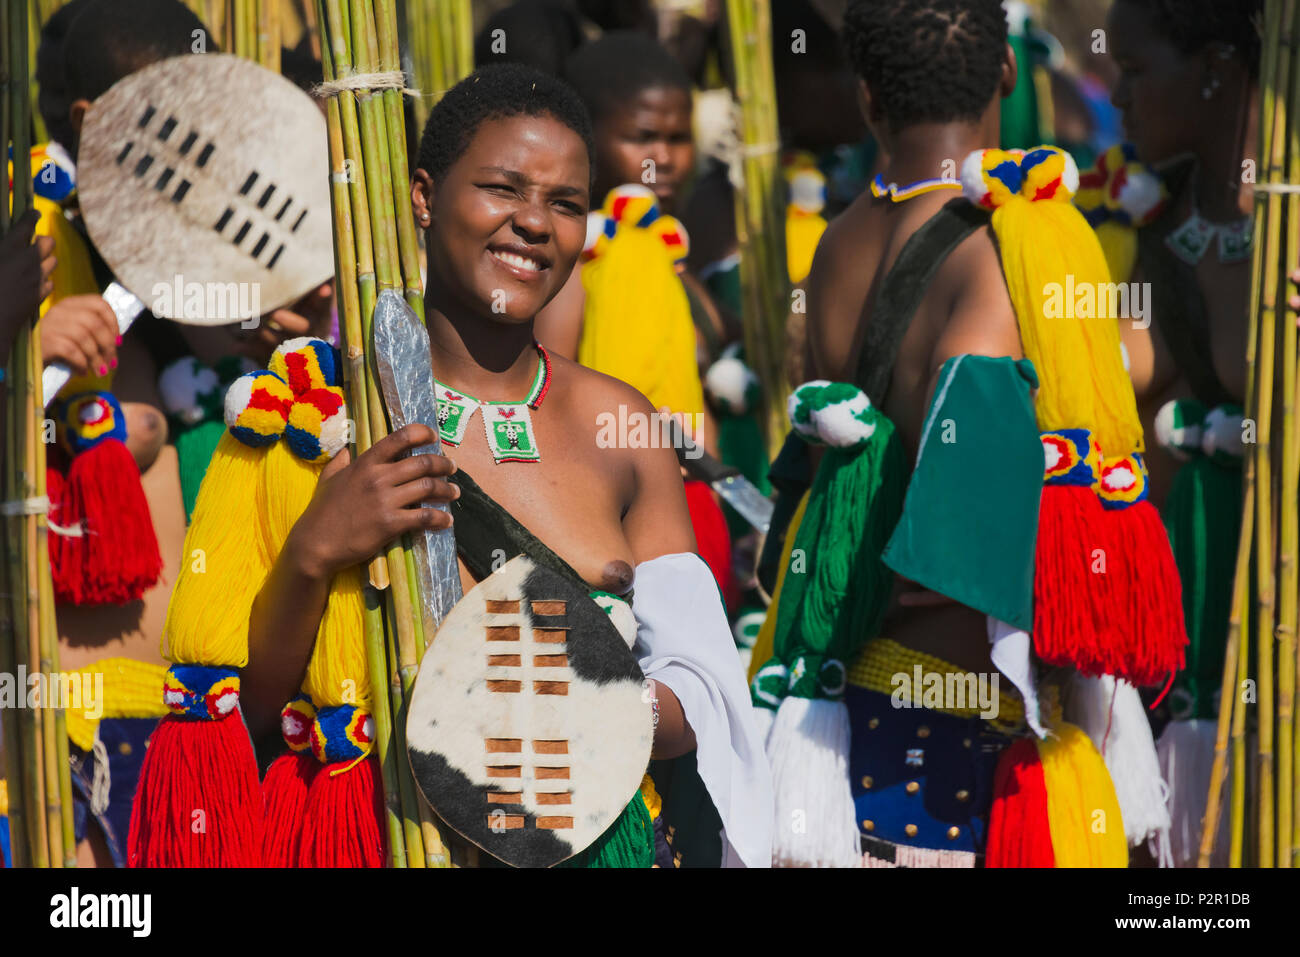 Swazi girls carrying reeds and shield made of animal skin parade at Umhlanga (Reed Dance Festival), Swaziland Stock Photo